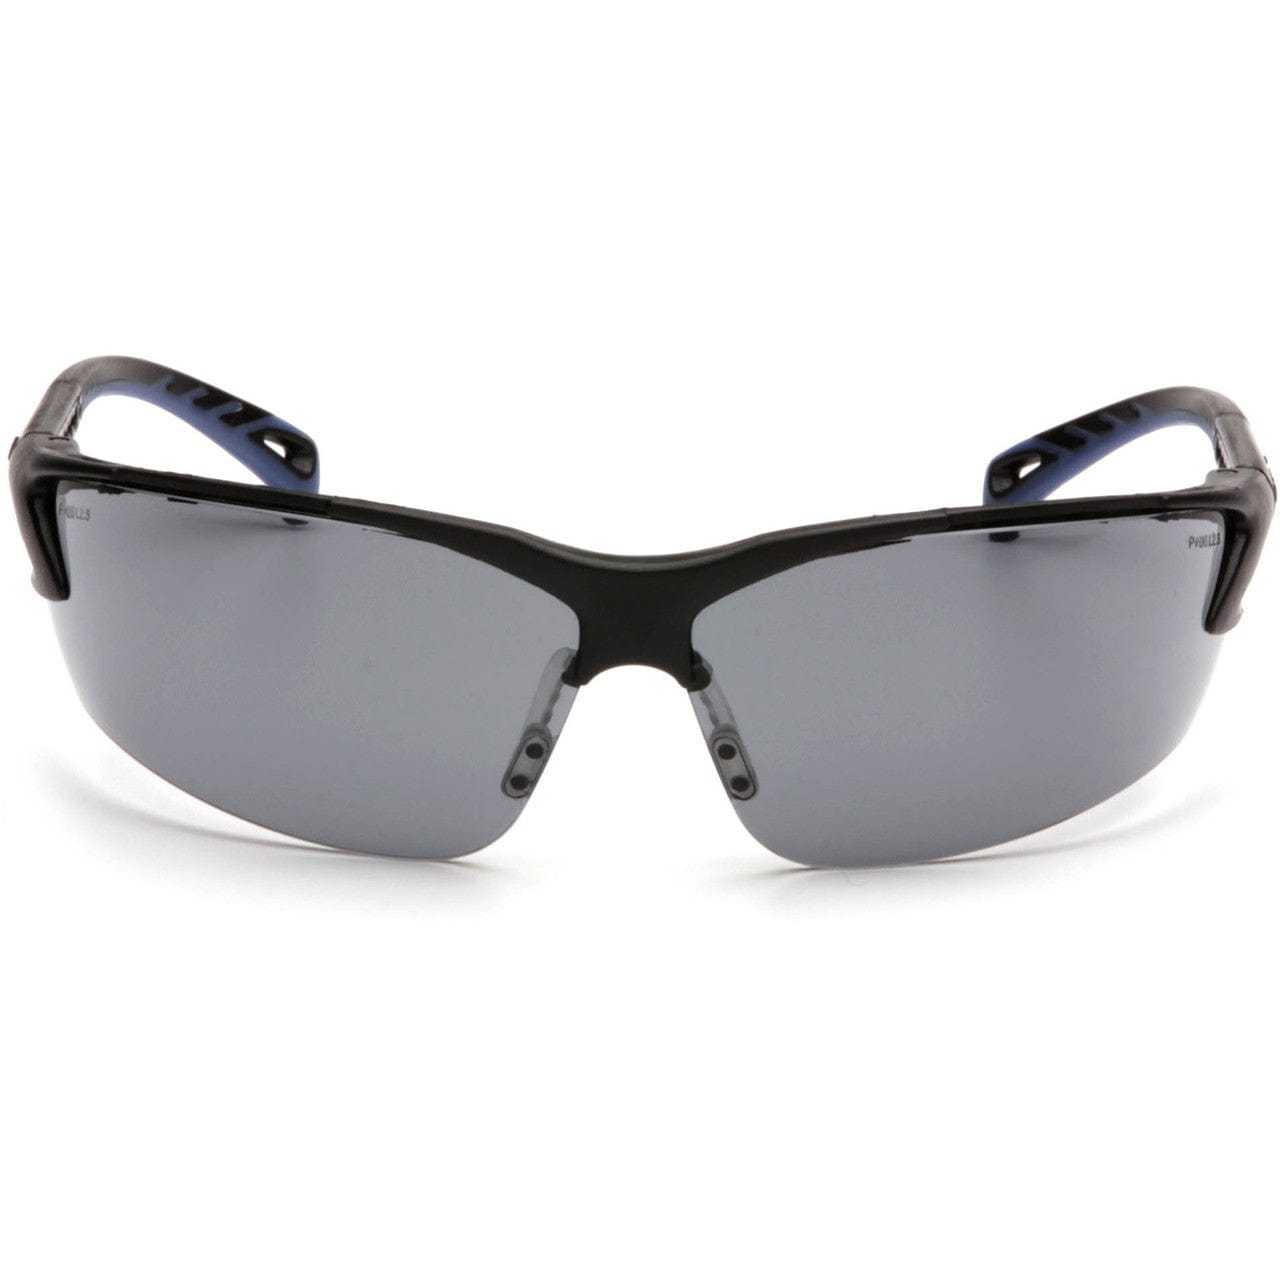 Pyramex Venture 3 Safety Glasses with Black Frame and Gray Anti-Fog Lens SB5720DT Front View